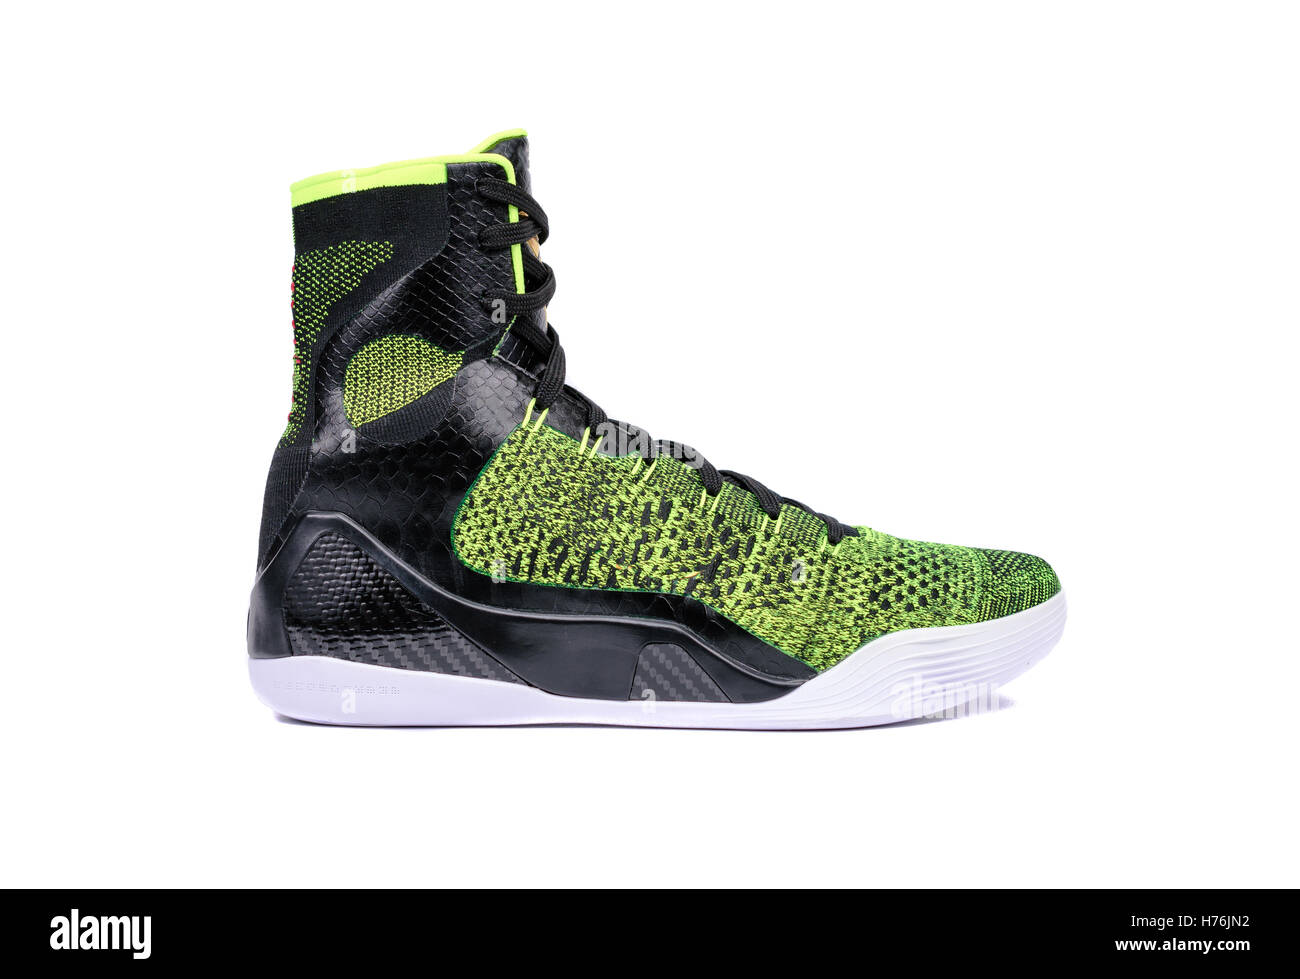 Ultra modern high-top green and black basketball shoe sneaker, isolated on white Stock Photo